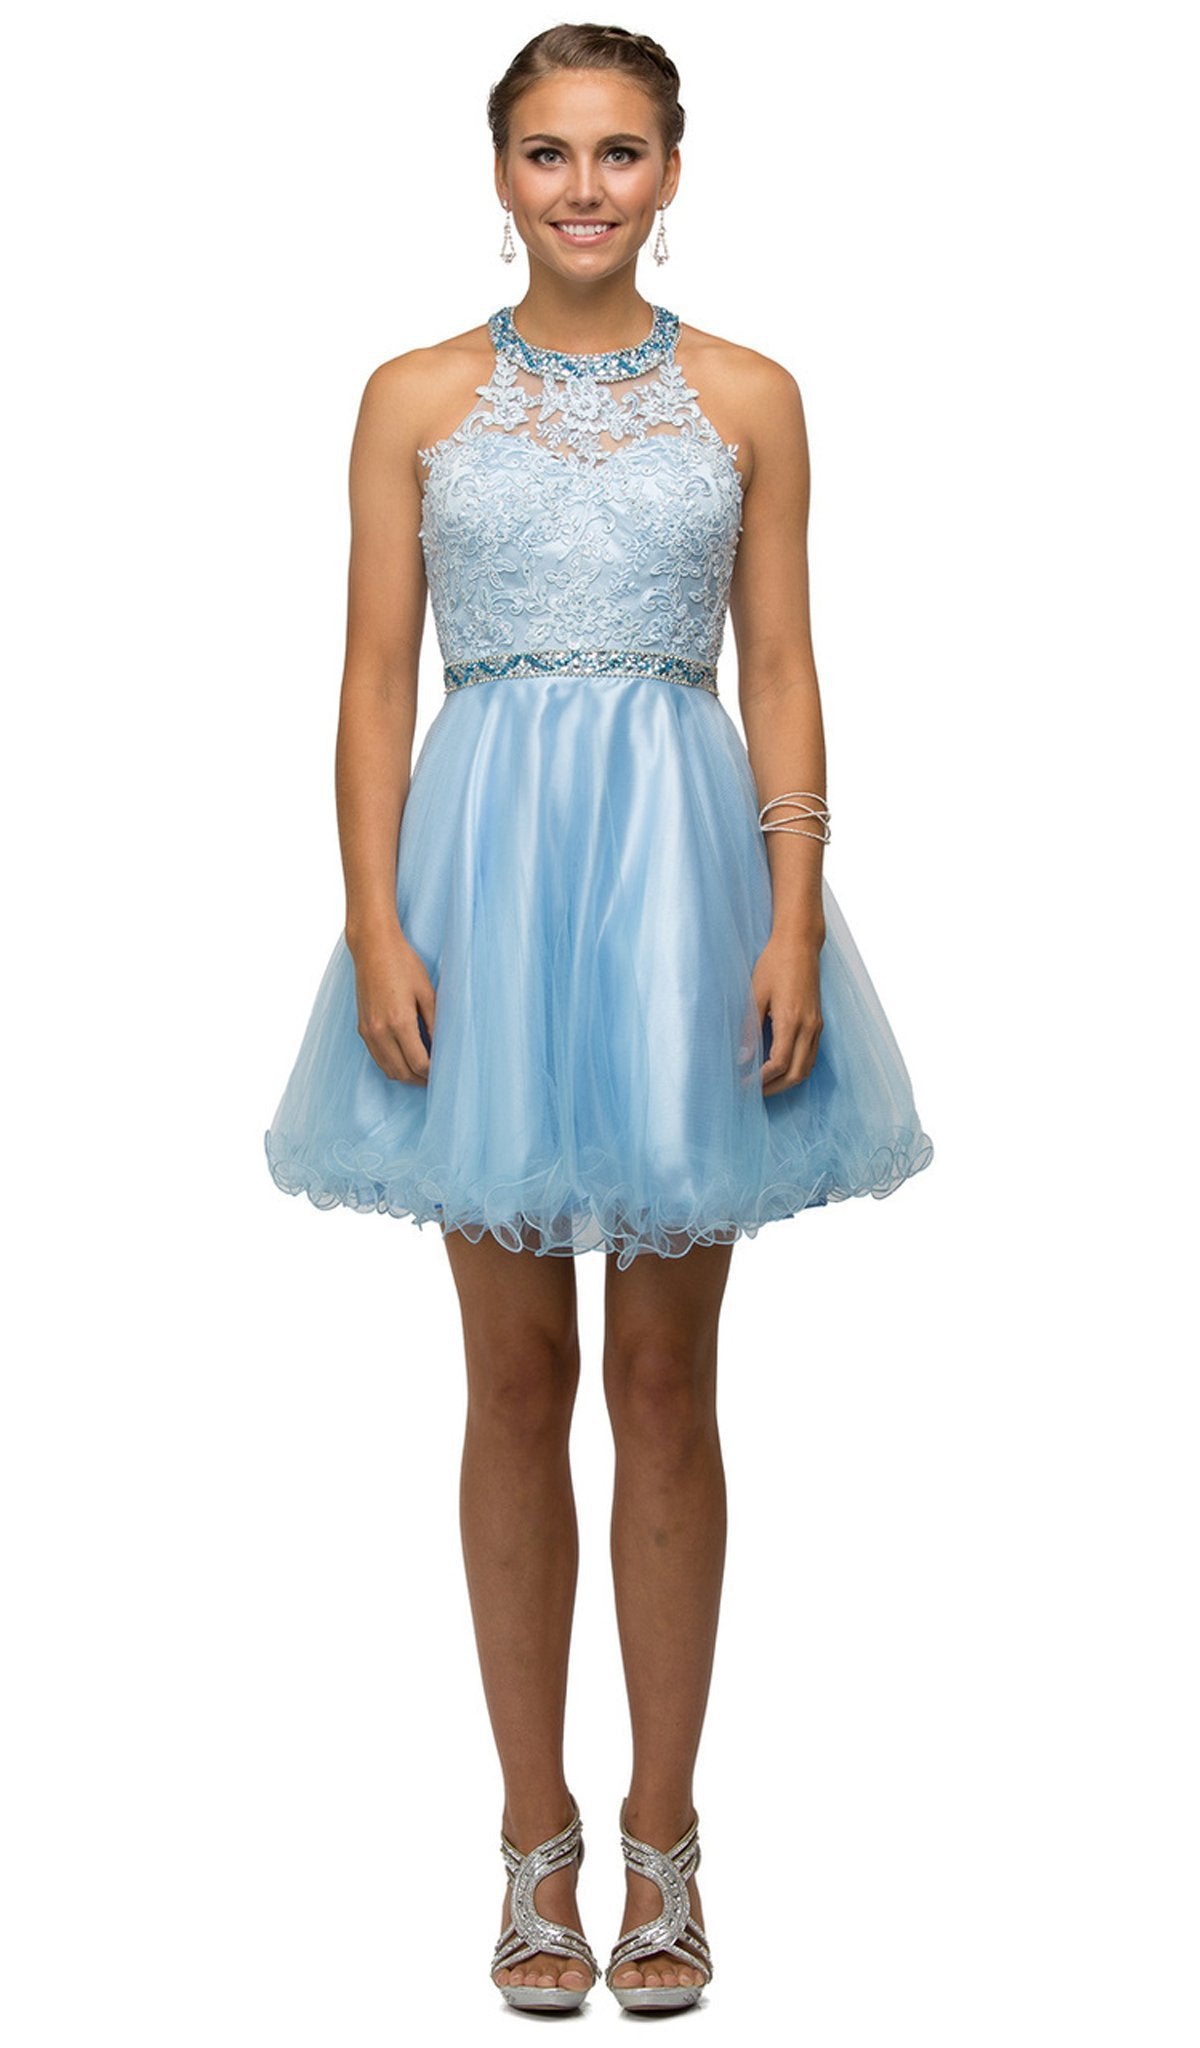 Dancing Queen - 9534 Bejeweled Collar Halter Lace A-Line Homecoming Dress